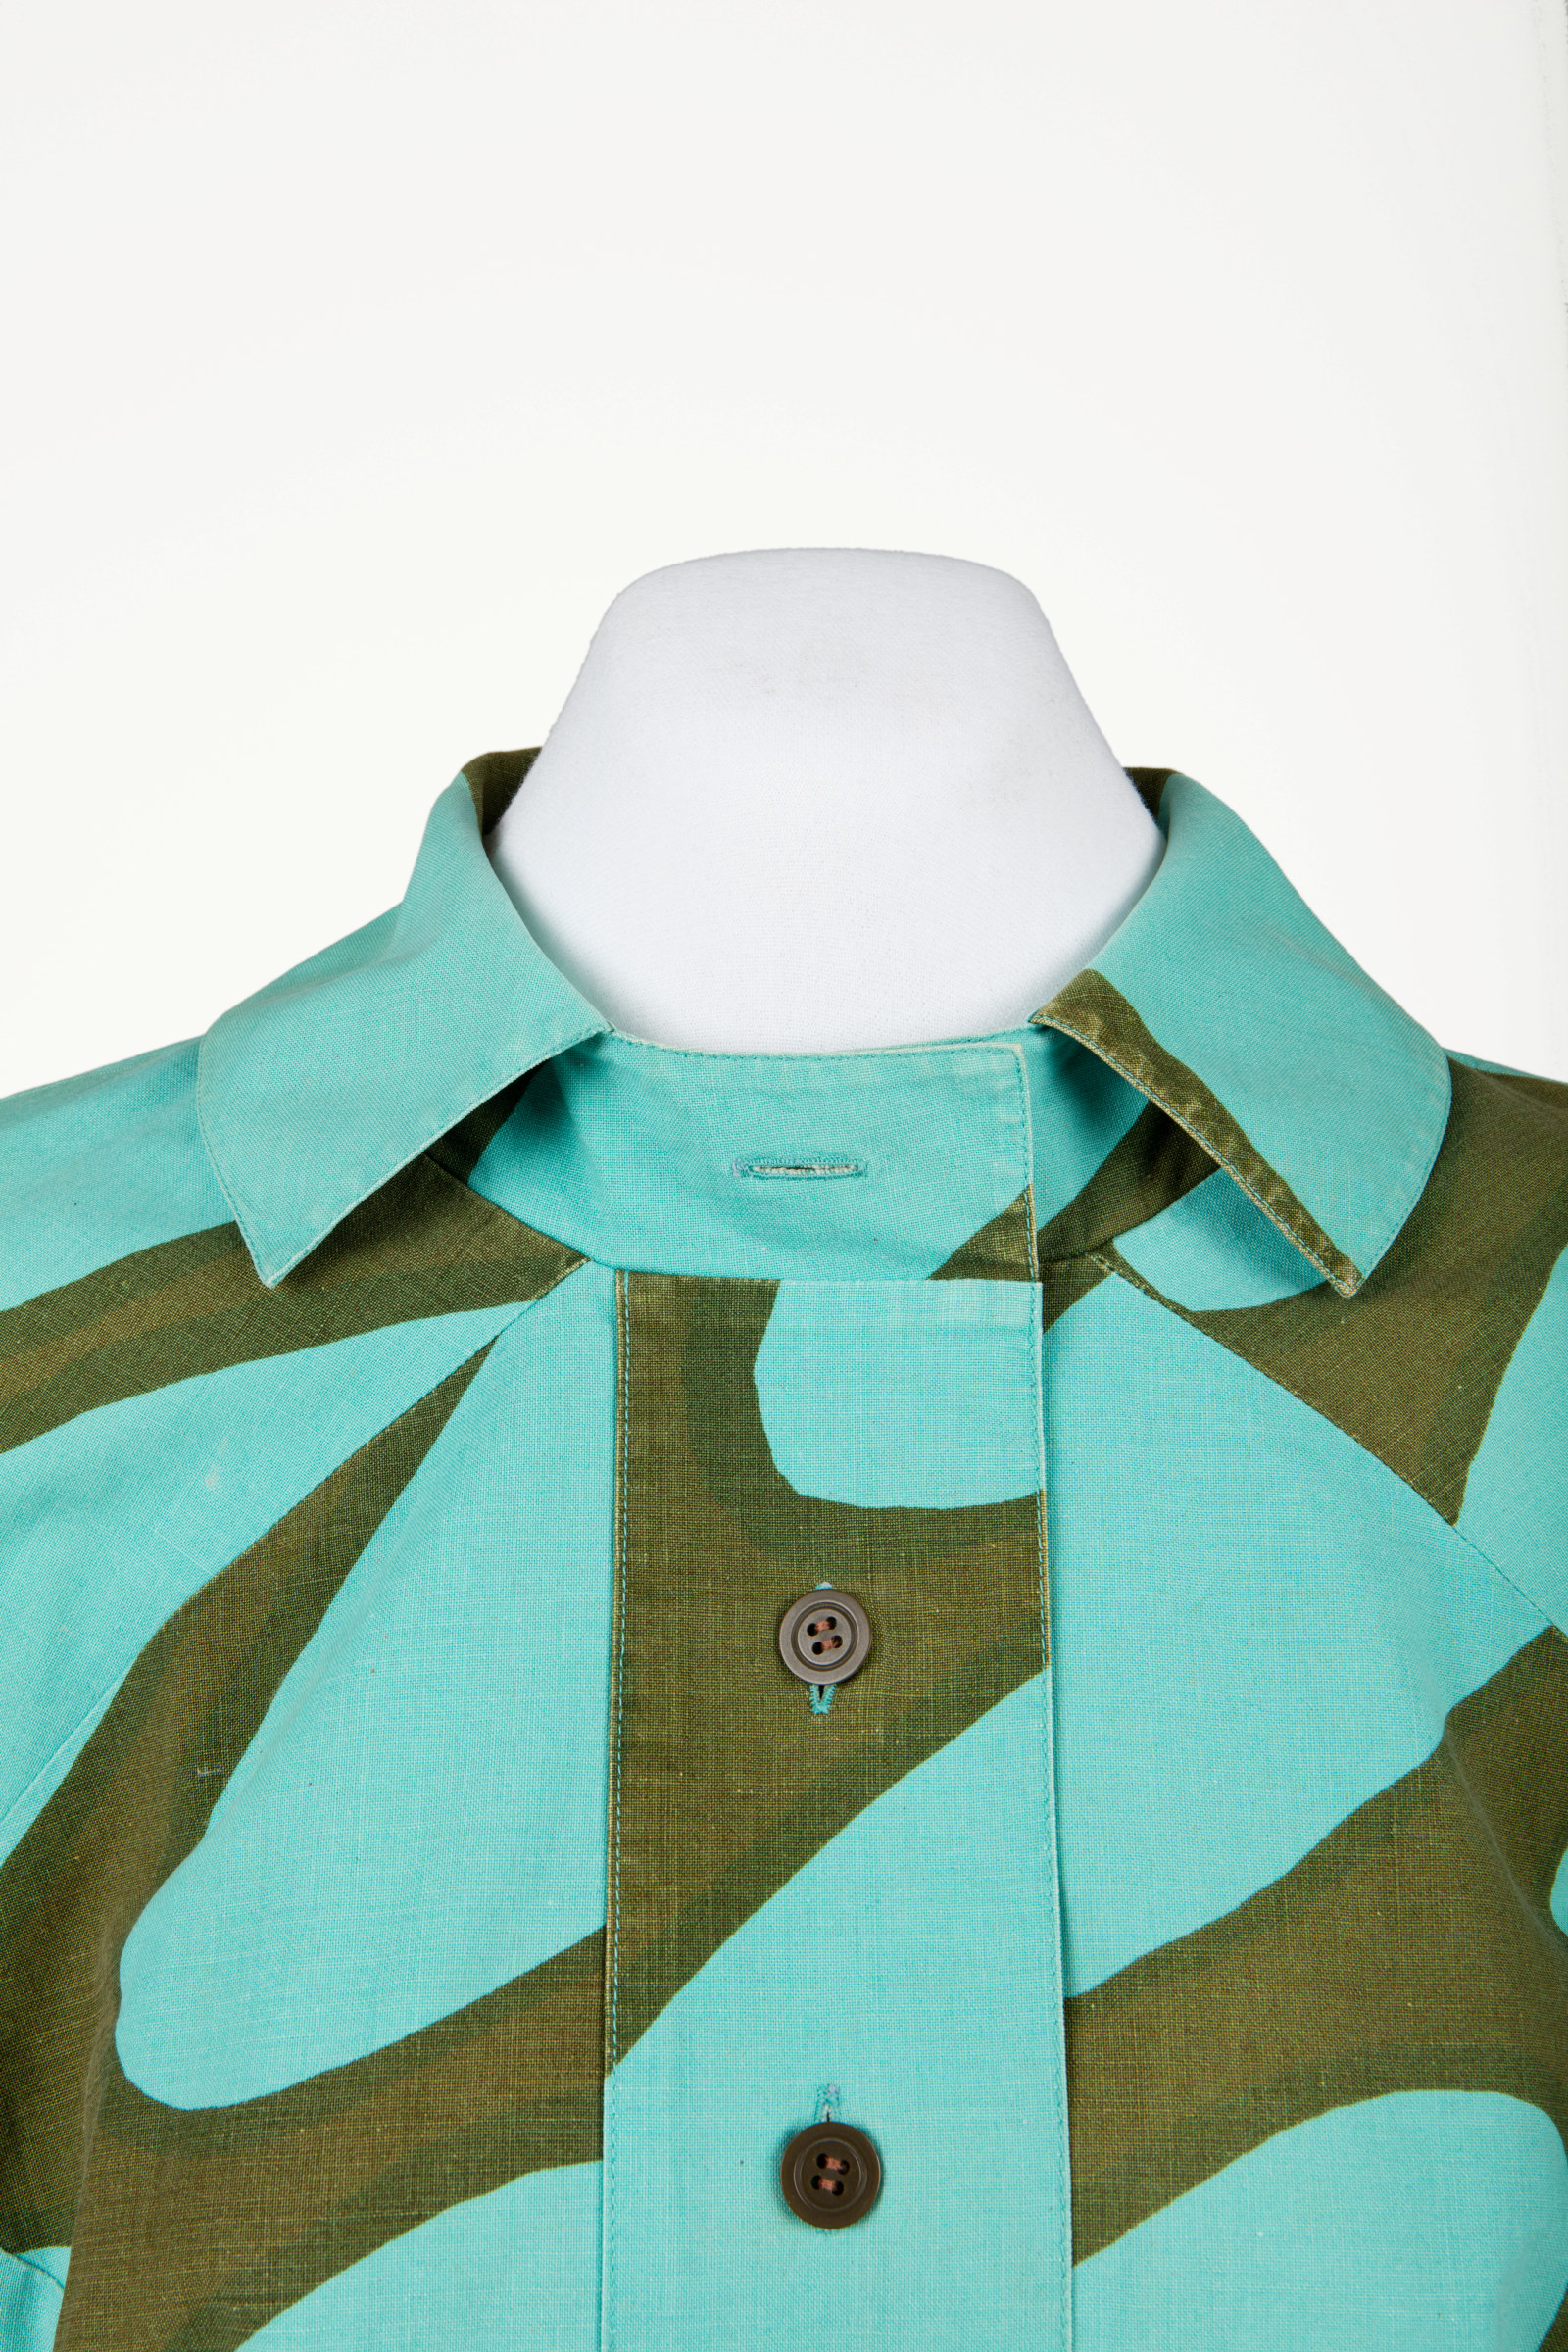 Shirt or smock, 'Linssi' textile design by Kaarina Kellomaki for Marimekko, Finland, 1966; used by Marion Best Pty Ltd staff as an unofficial uniform